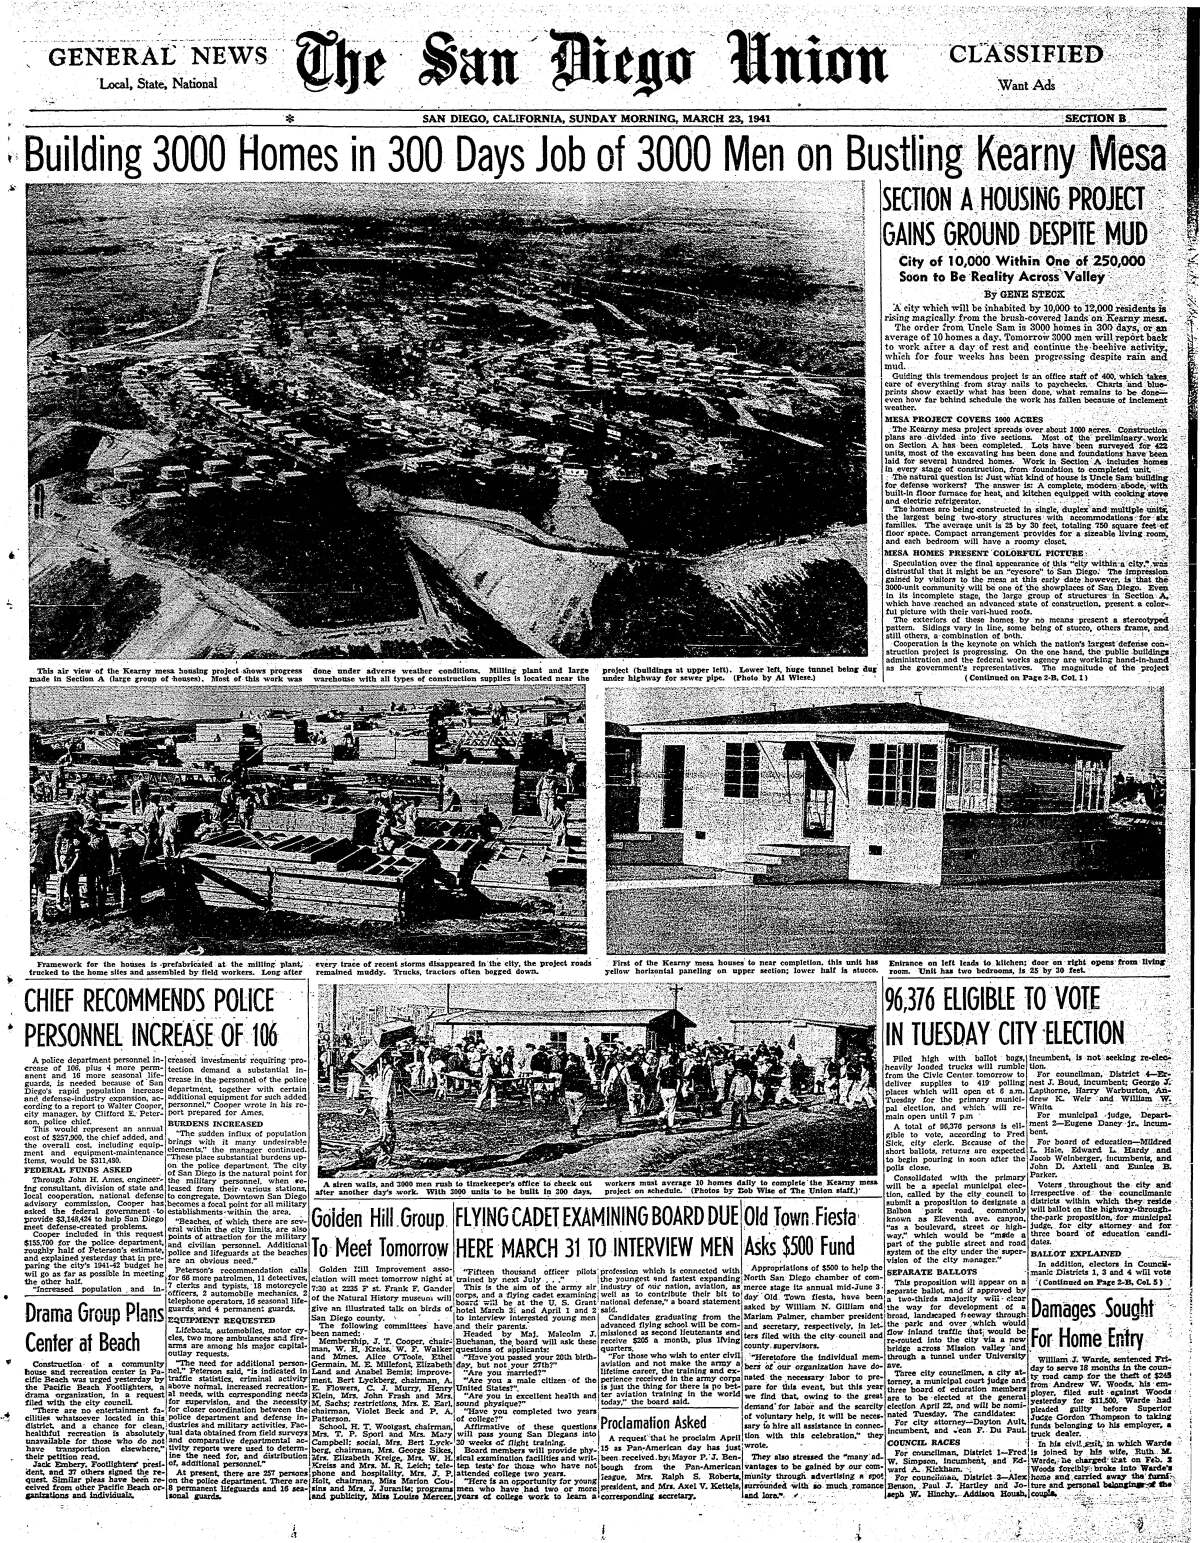 From the Archives: Linda Vista started with a housing boom in 1941 - The  San Diego Union-Tribune